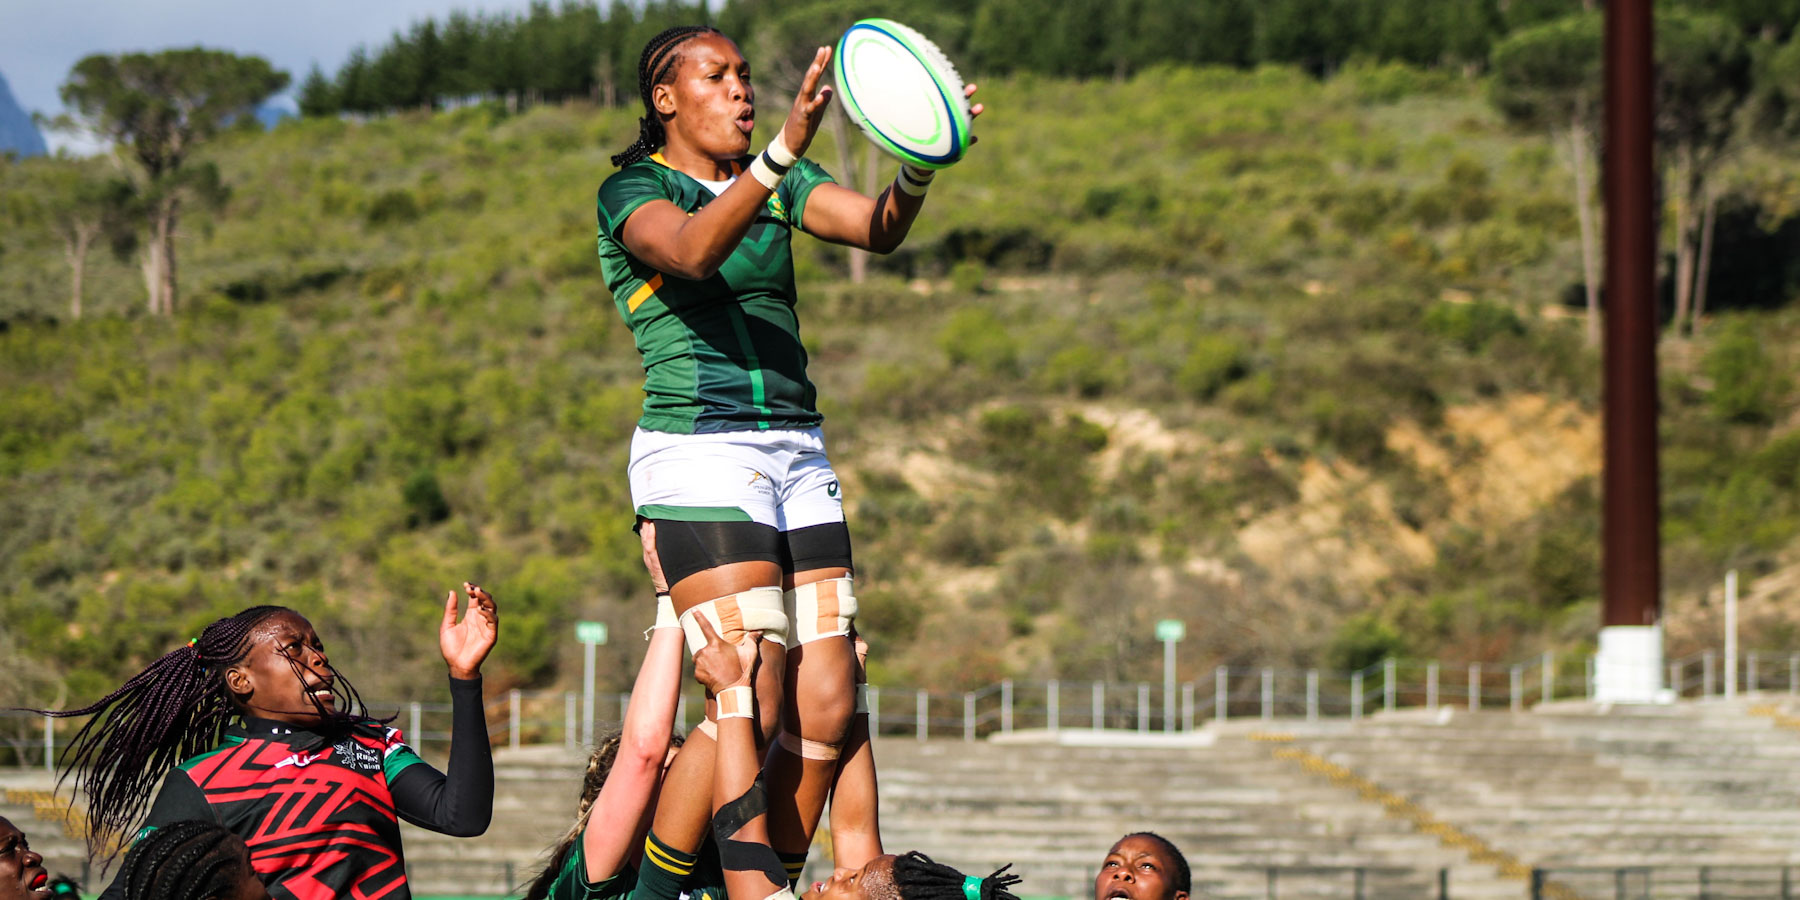 The Springbok Women's lineout functioned very well on Thursday.